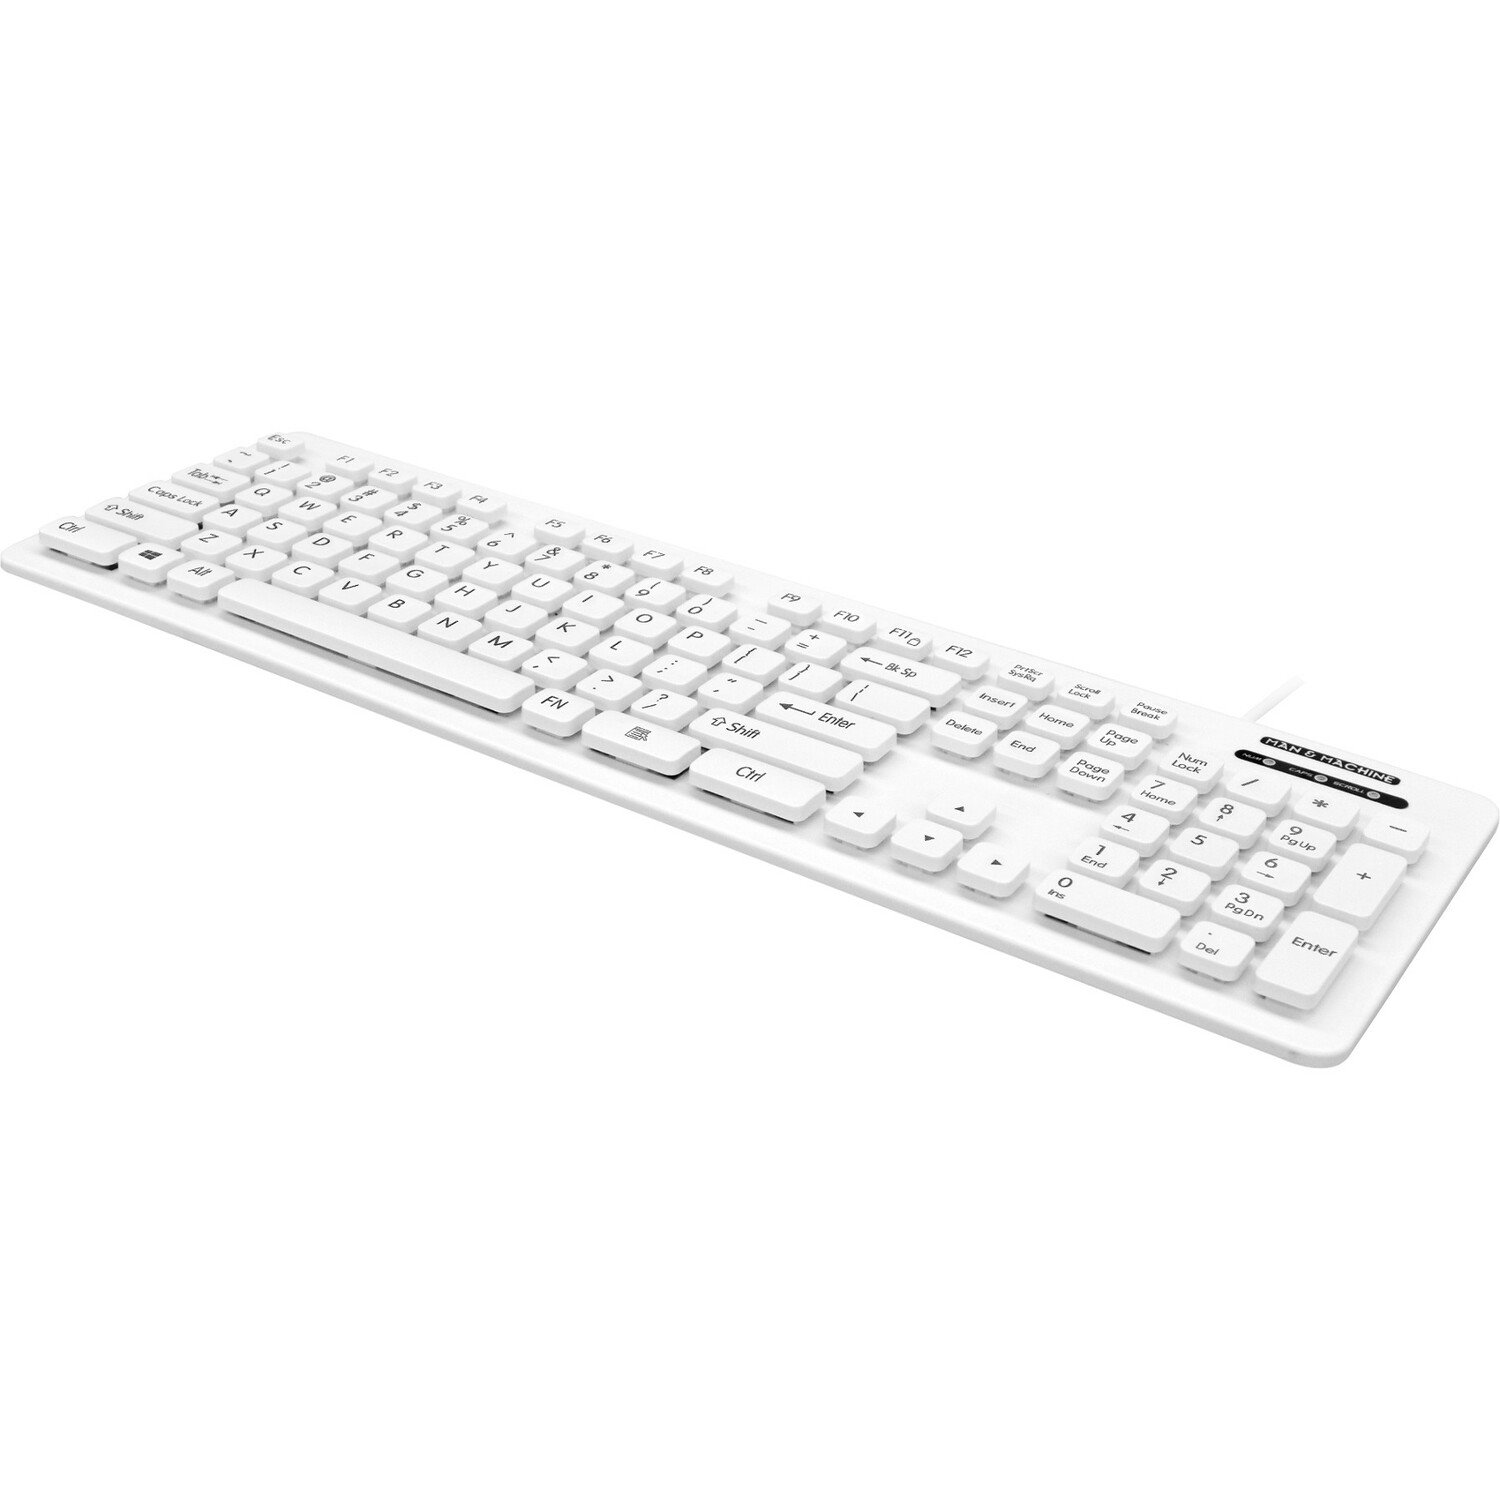 Man & Machine L Cool Keyboard - Cable Connectivity - USB Interface - English (US) - White